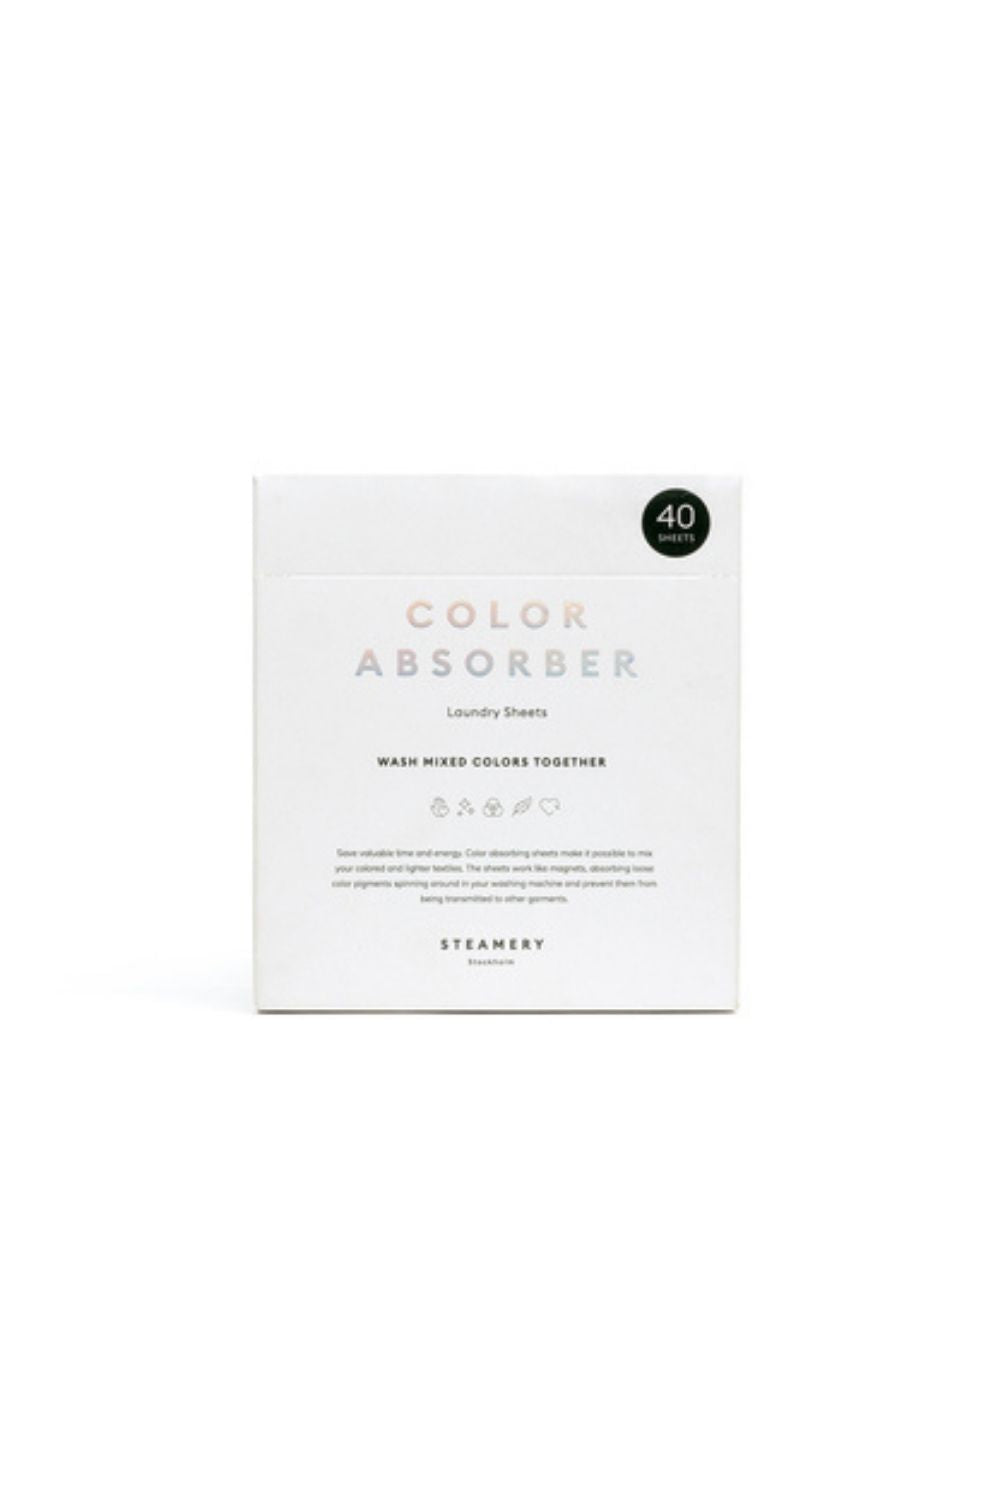 O'TAY Color Absorbing Wipes Care Products White